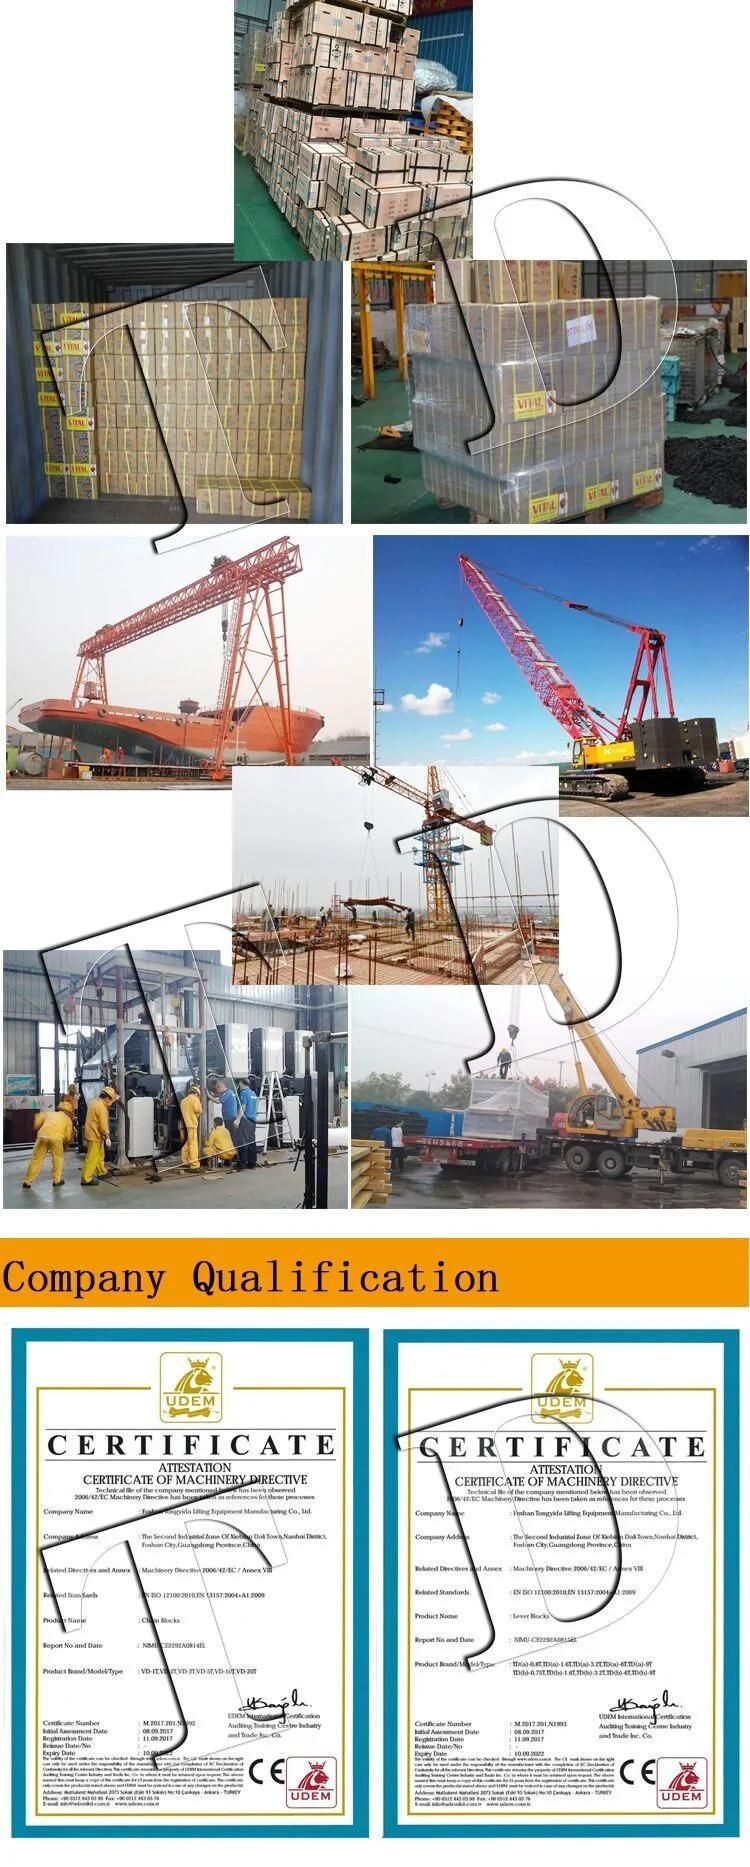 Top Quality 1ton-10ton 3meters 6meters Vital Manual Chain Block Chain Hoist Lifting Block with G80 Load Chain